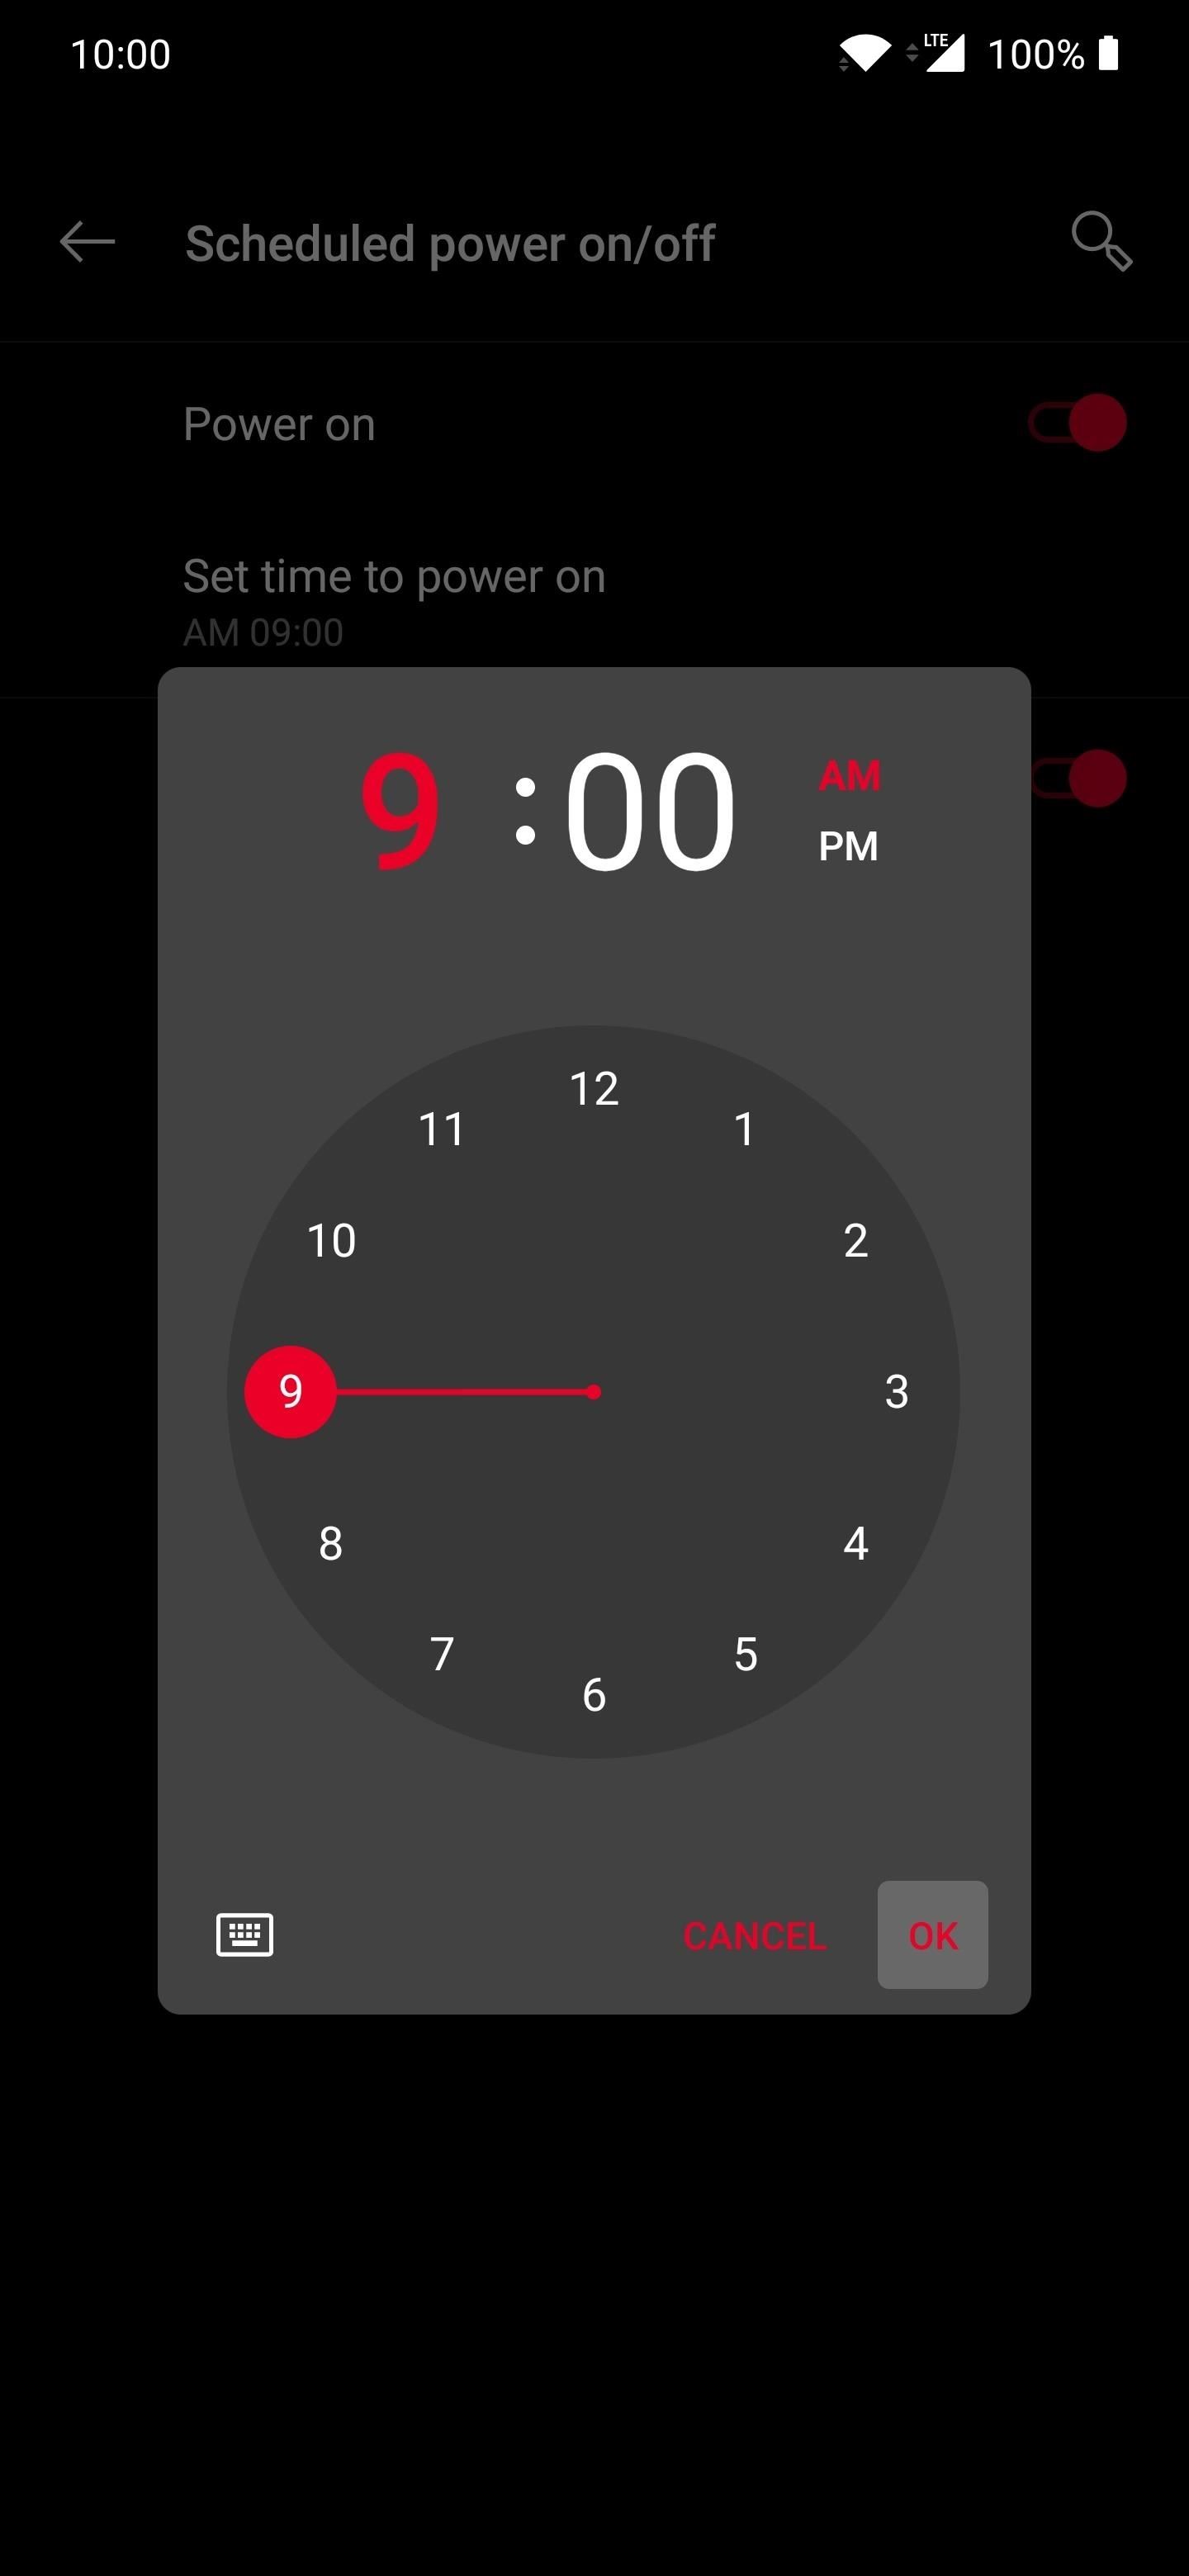 How to Make Your OnePlus Phone Automatically Restart Overnight